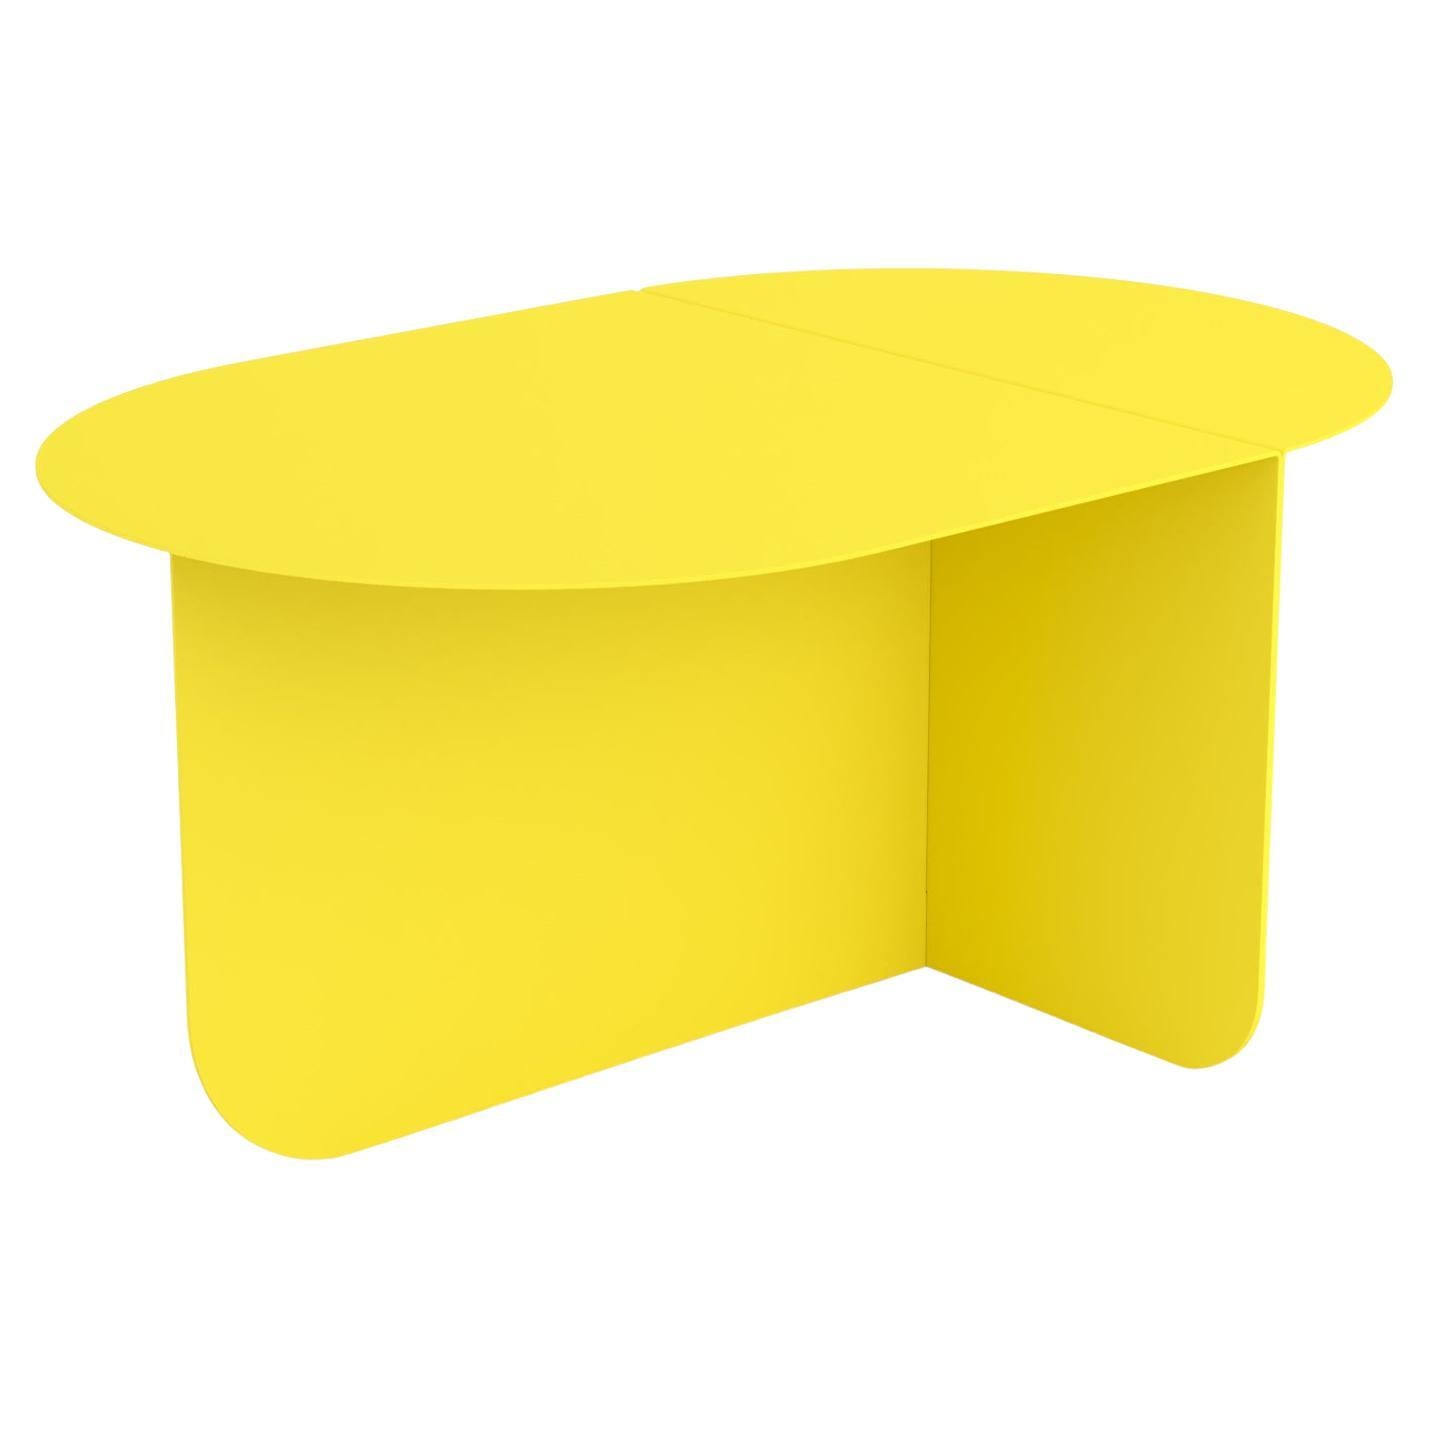 Colour, a Modern Oval Coffee Table, Ral 1016 - Sulfur Yellow, by Bas Vellekoop For Sale